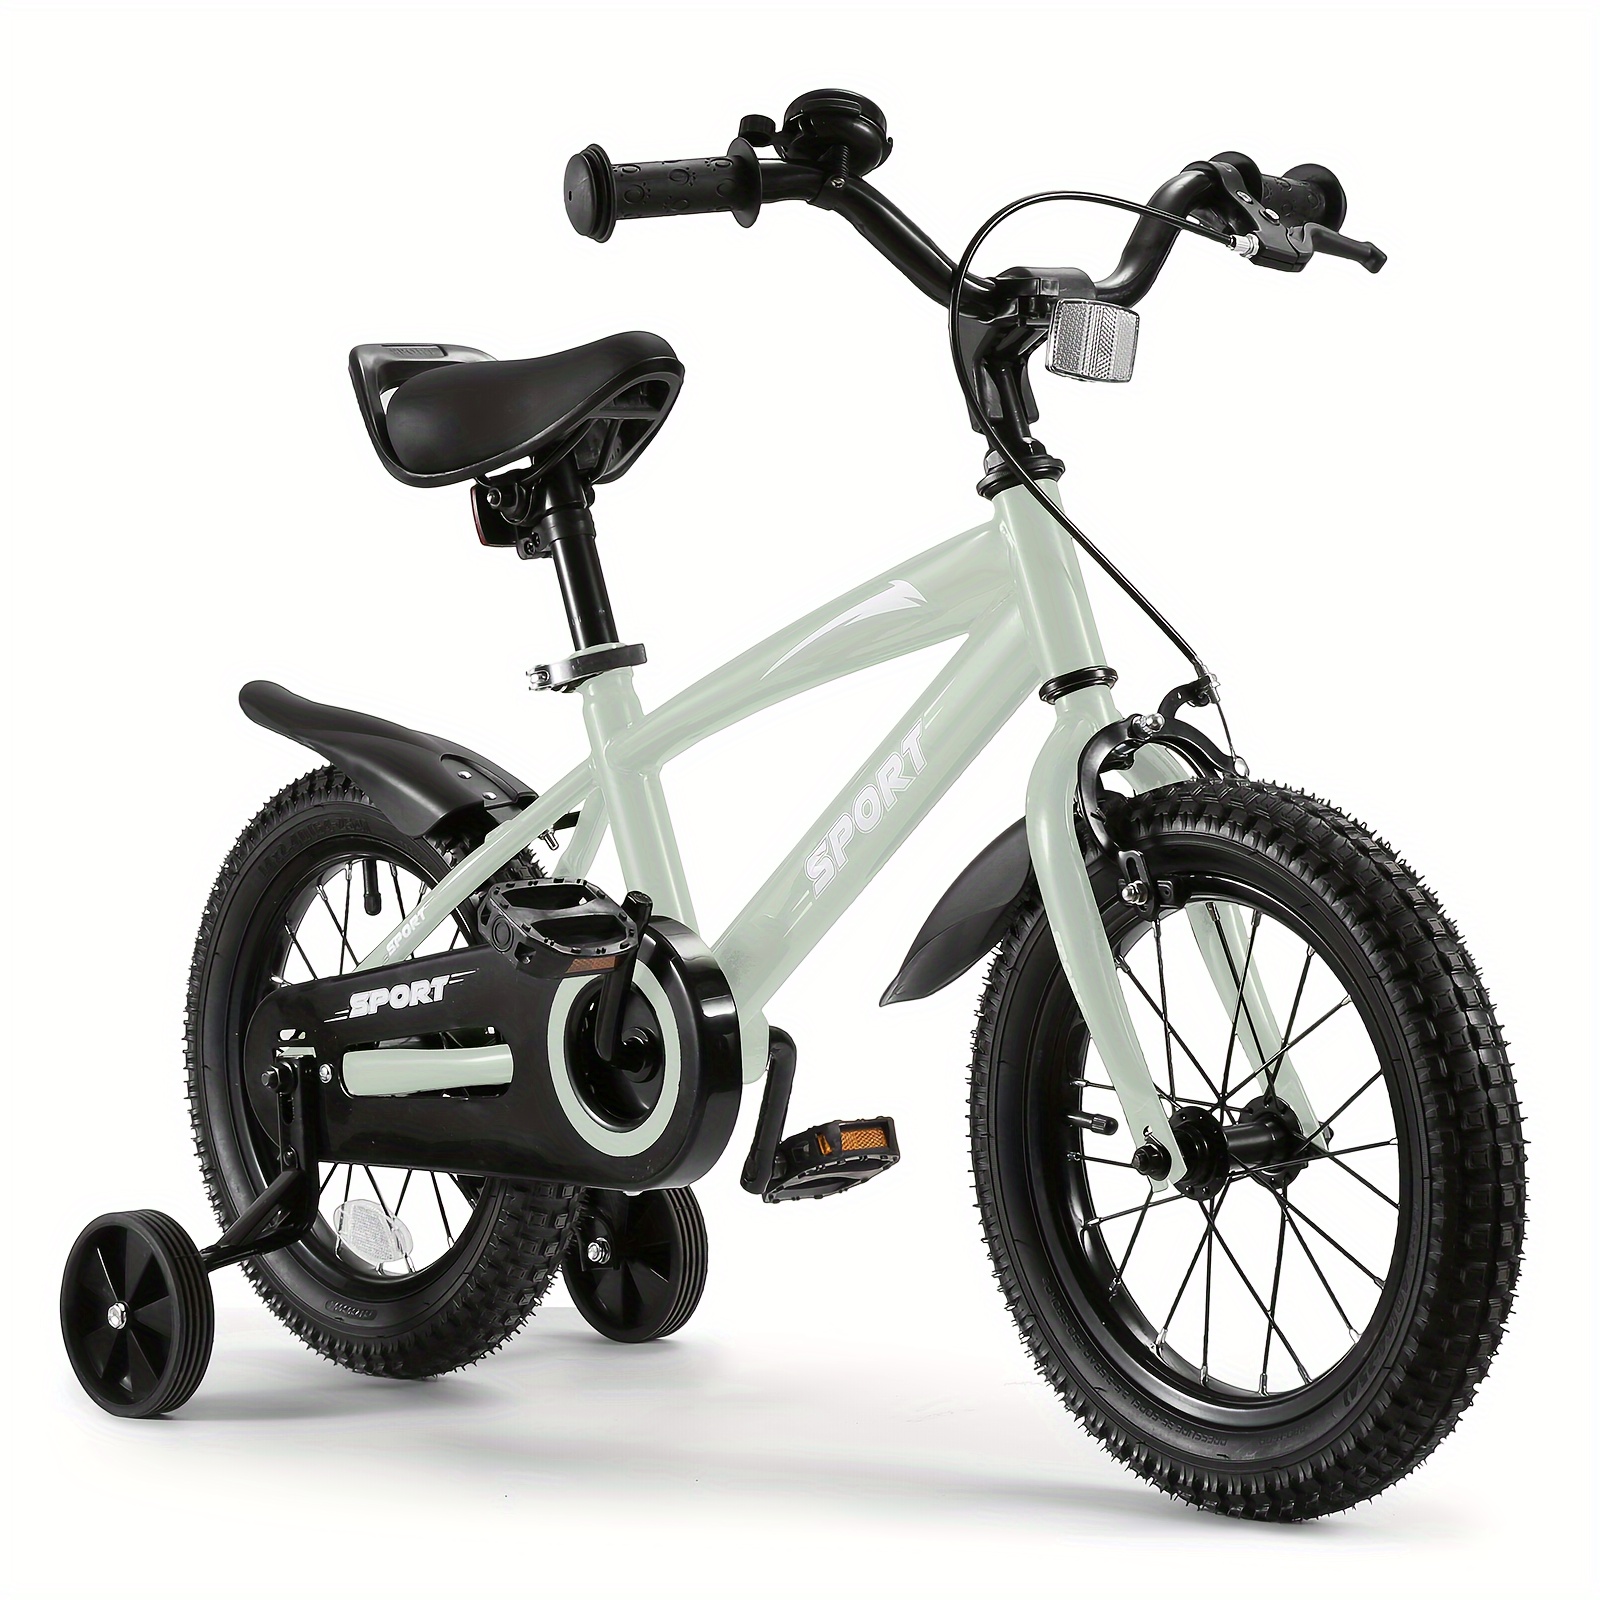 

14 Inch Kids Bike Kid's Bike For Boys Girls Ages 3-6 Kids, Children Bicycle With Training Wheels Suitable For 35-45 Inches Tall Children And Toddler